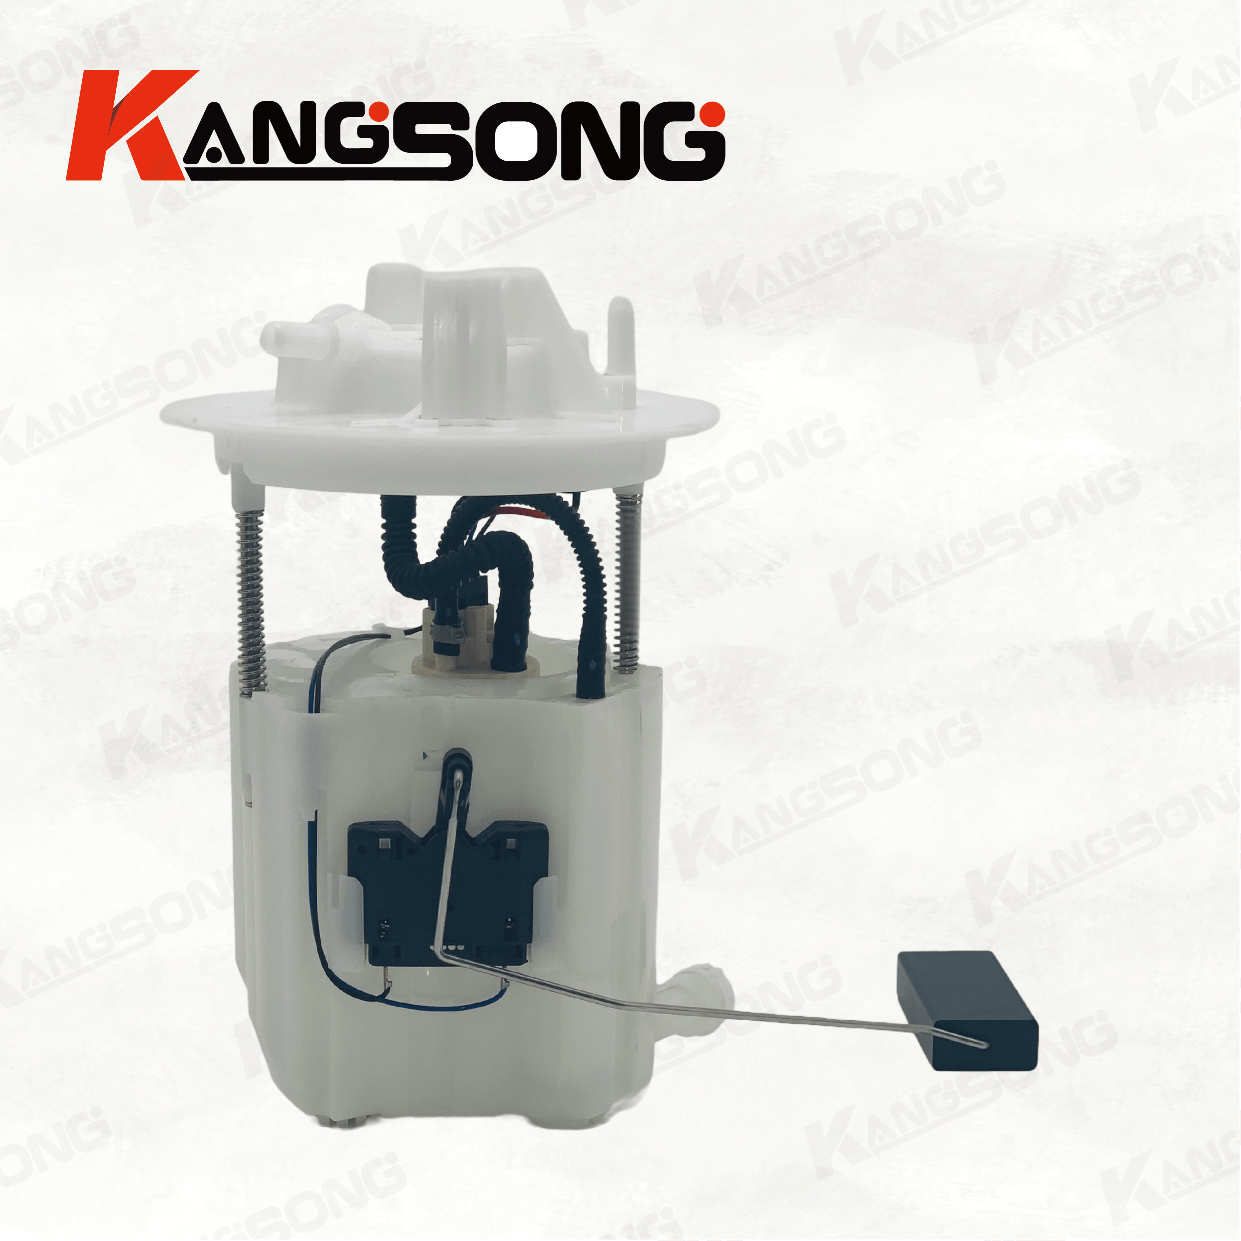 Applicable to Mercedes-Benz  GLE250 GLE350 W166 X166  /1664702594 / 1664702494/Fuel Pump Assembly/KS-A710A